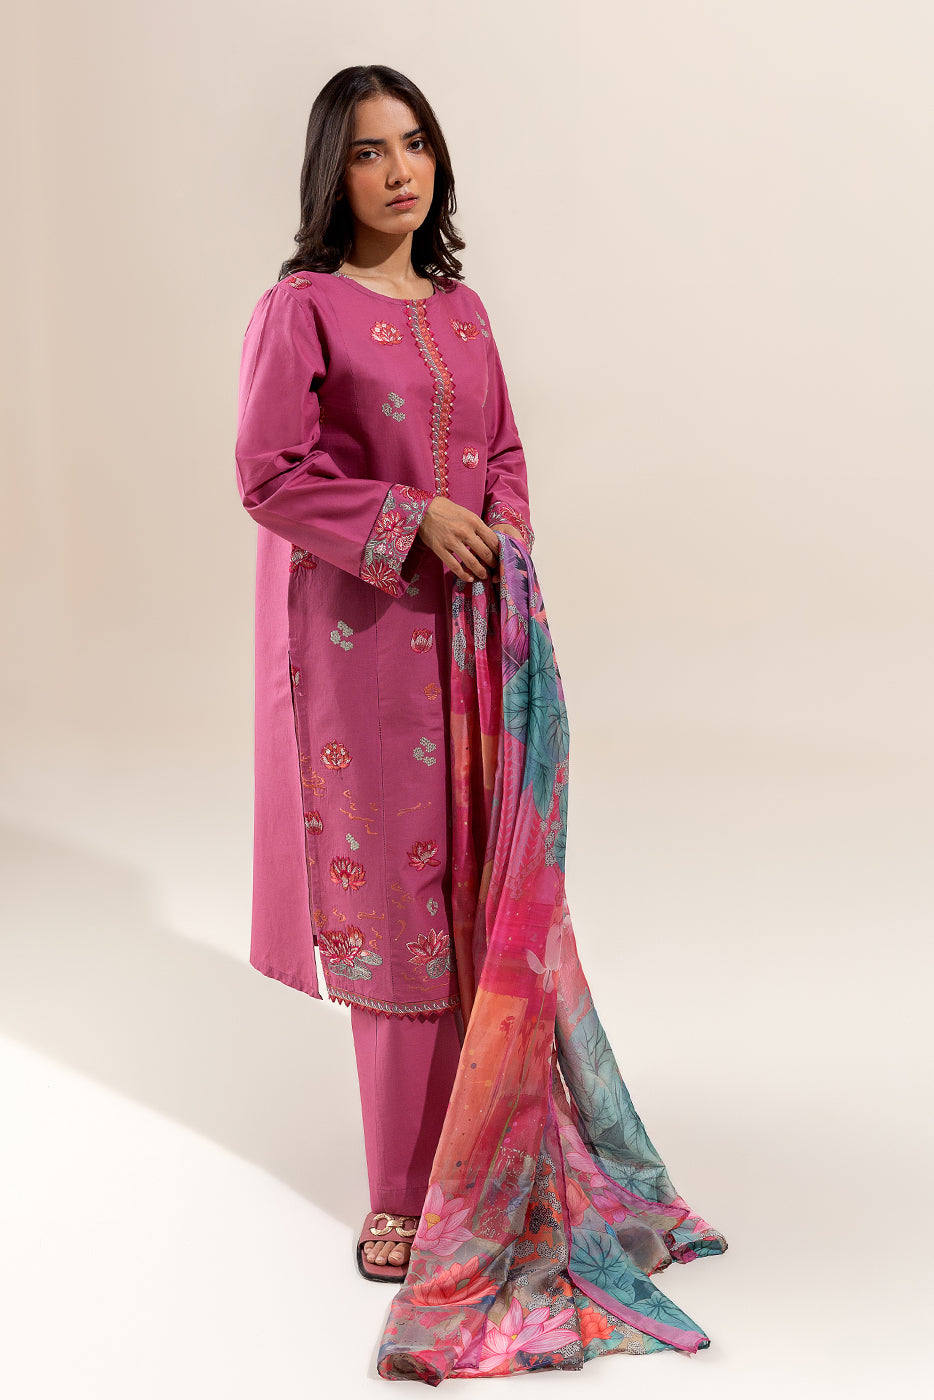 3 PIECE EMBROIDERED LAWN SUIT-LOTUS BLUSH (UNSTITCHED)